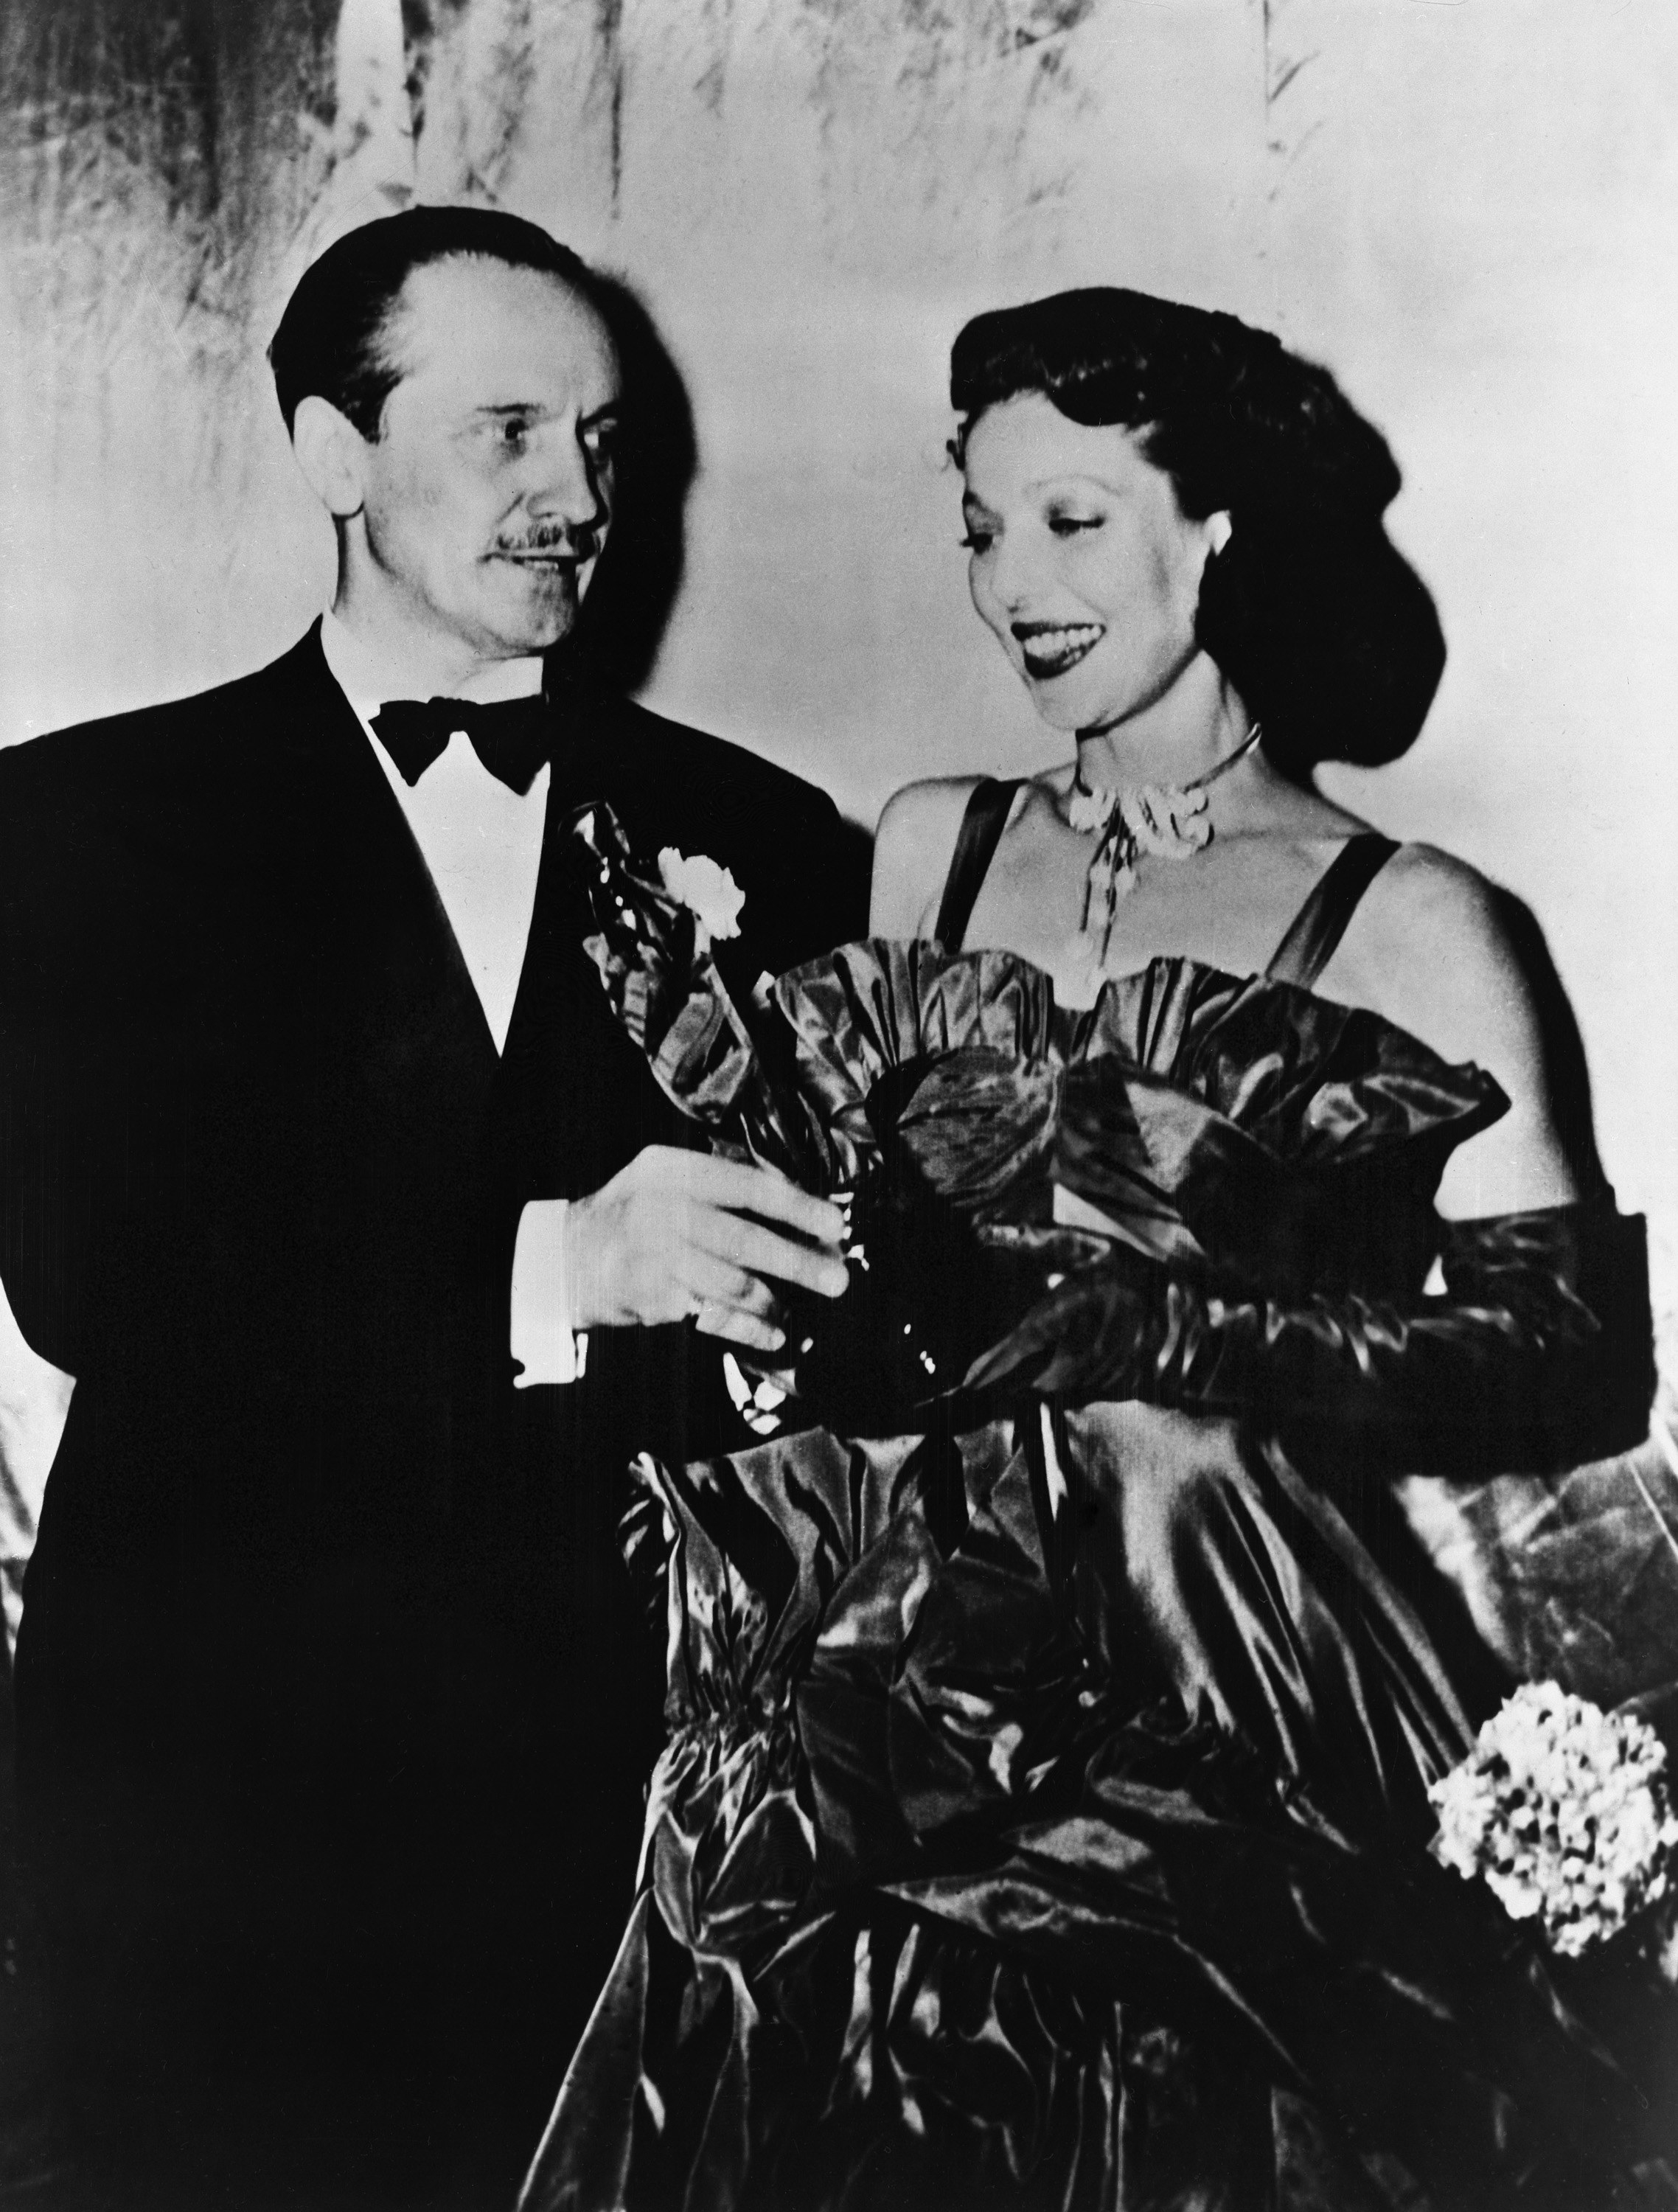 Loretta Young accepting her Best Actress Oscar in 1948